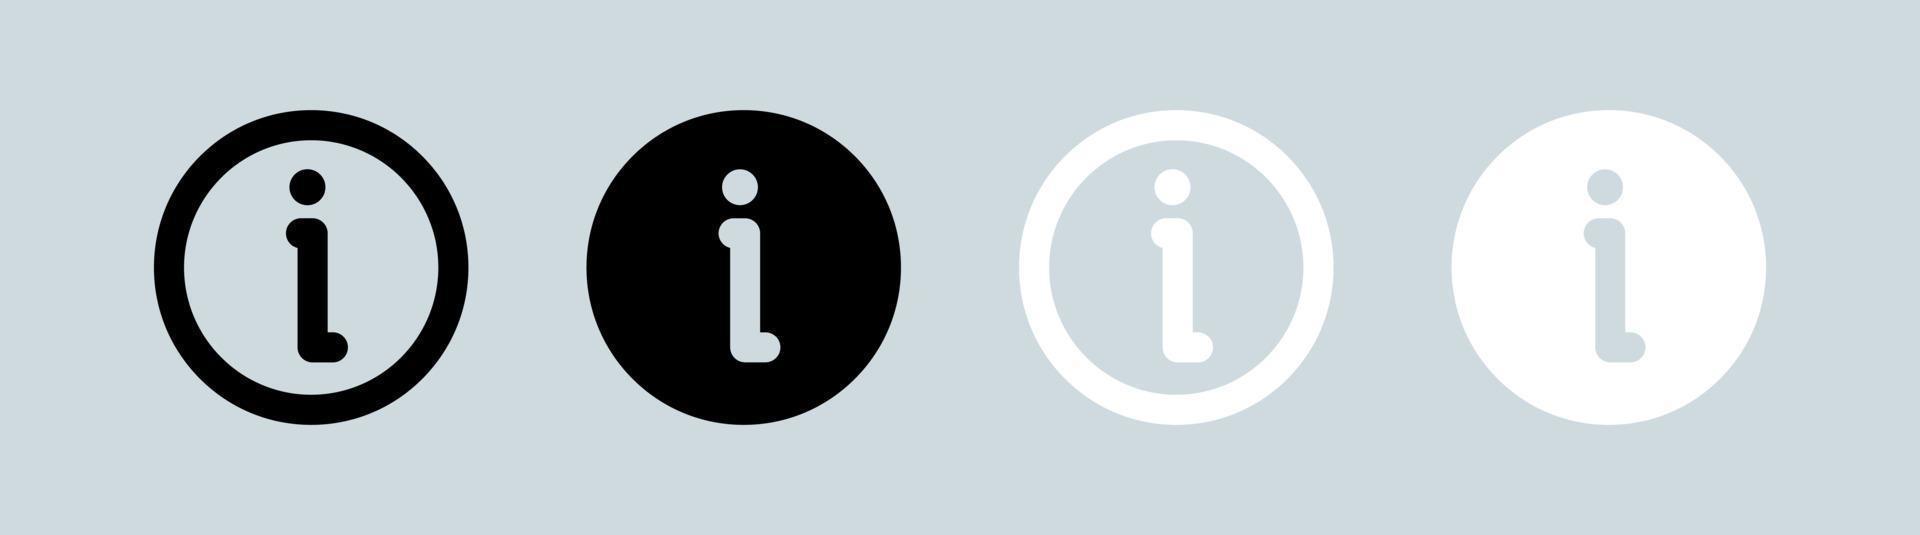 Info icon in black and white colors. Information sign vector collection.